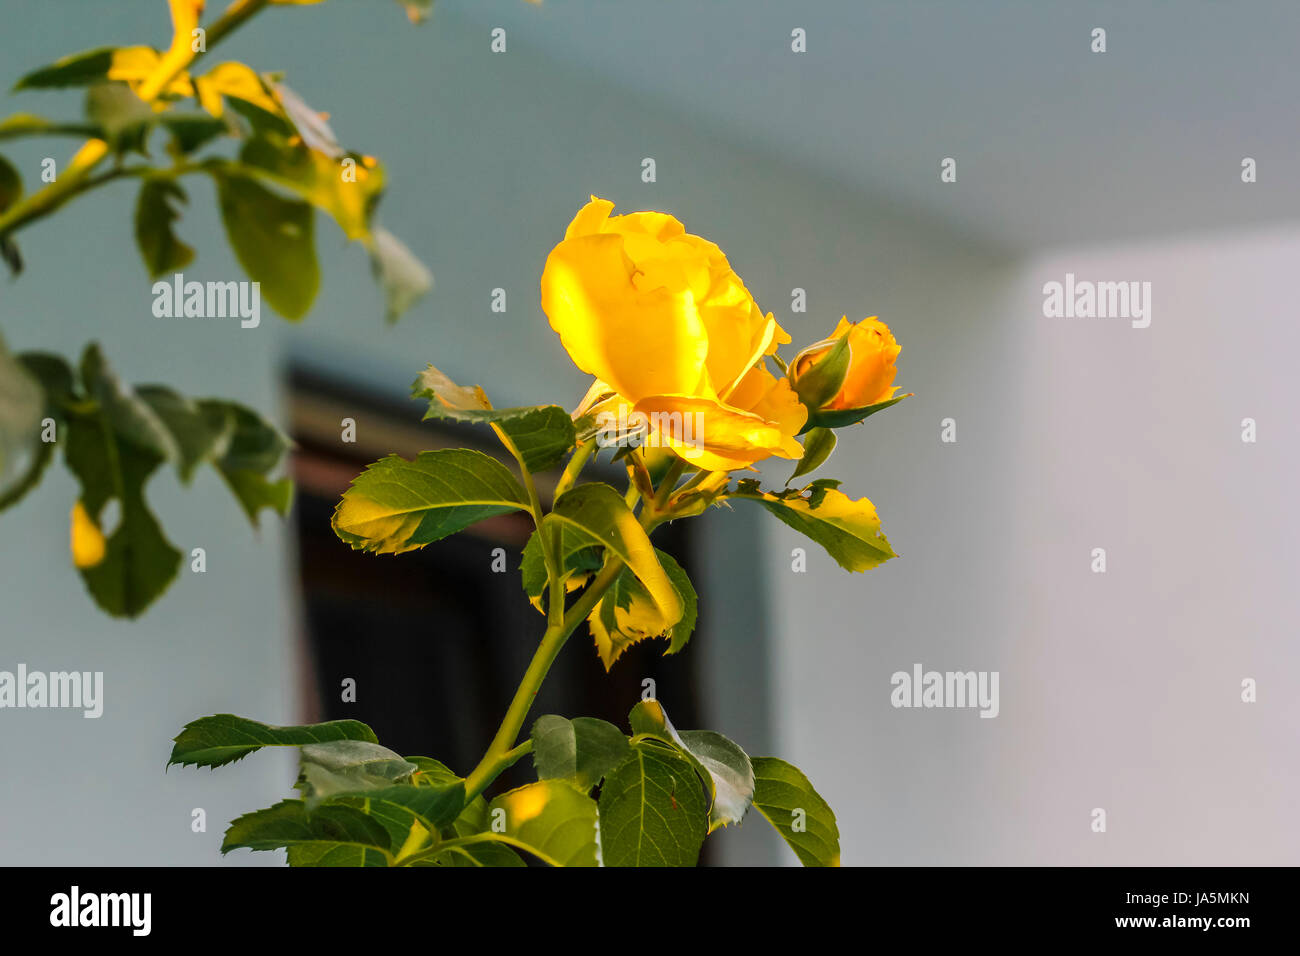 leaf, object, single, isolated, flower, plant, rose, green, bloom, blossom, Stock Photo